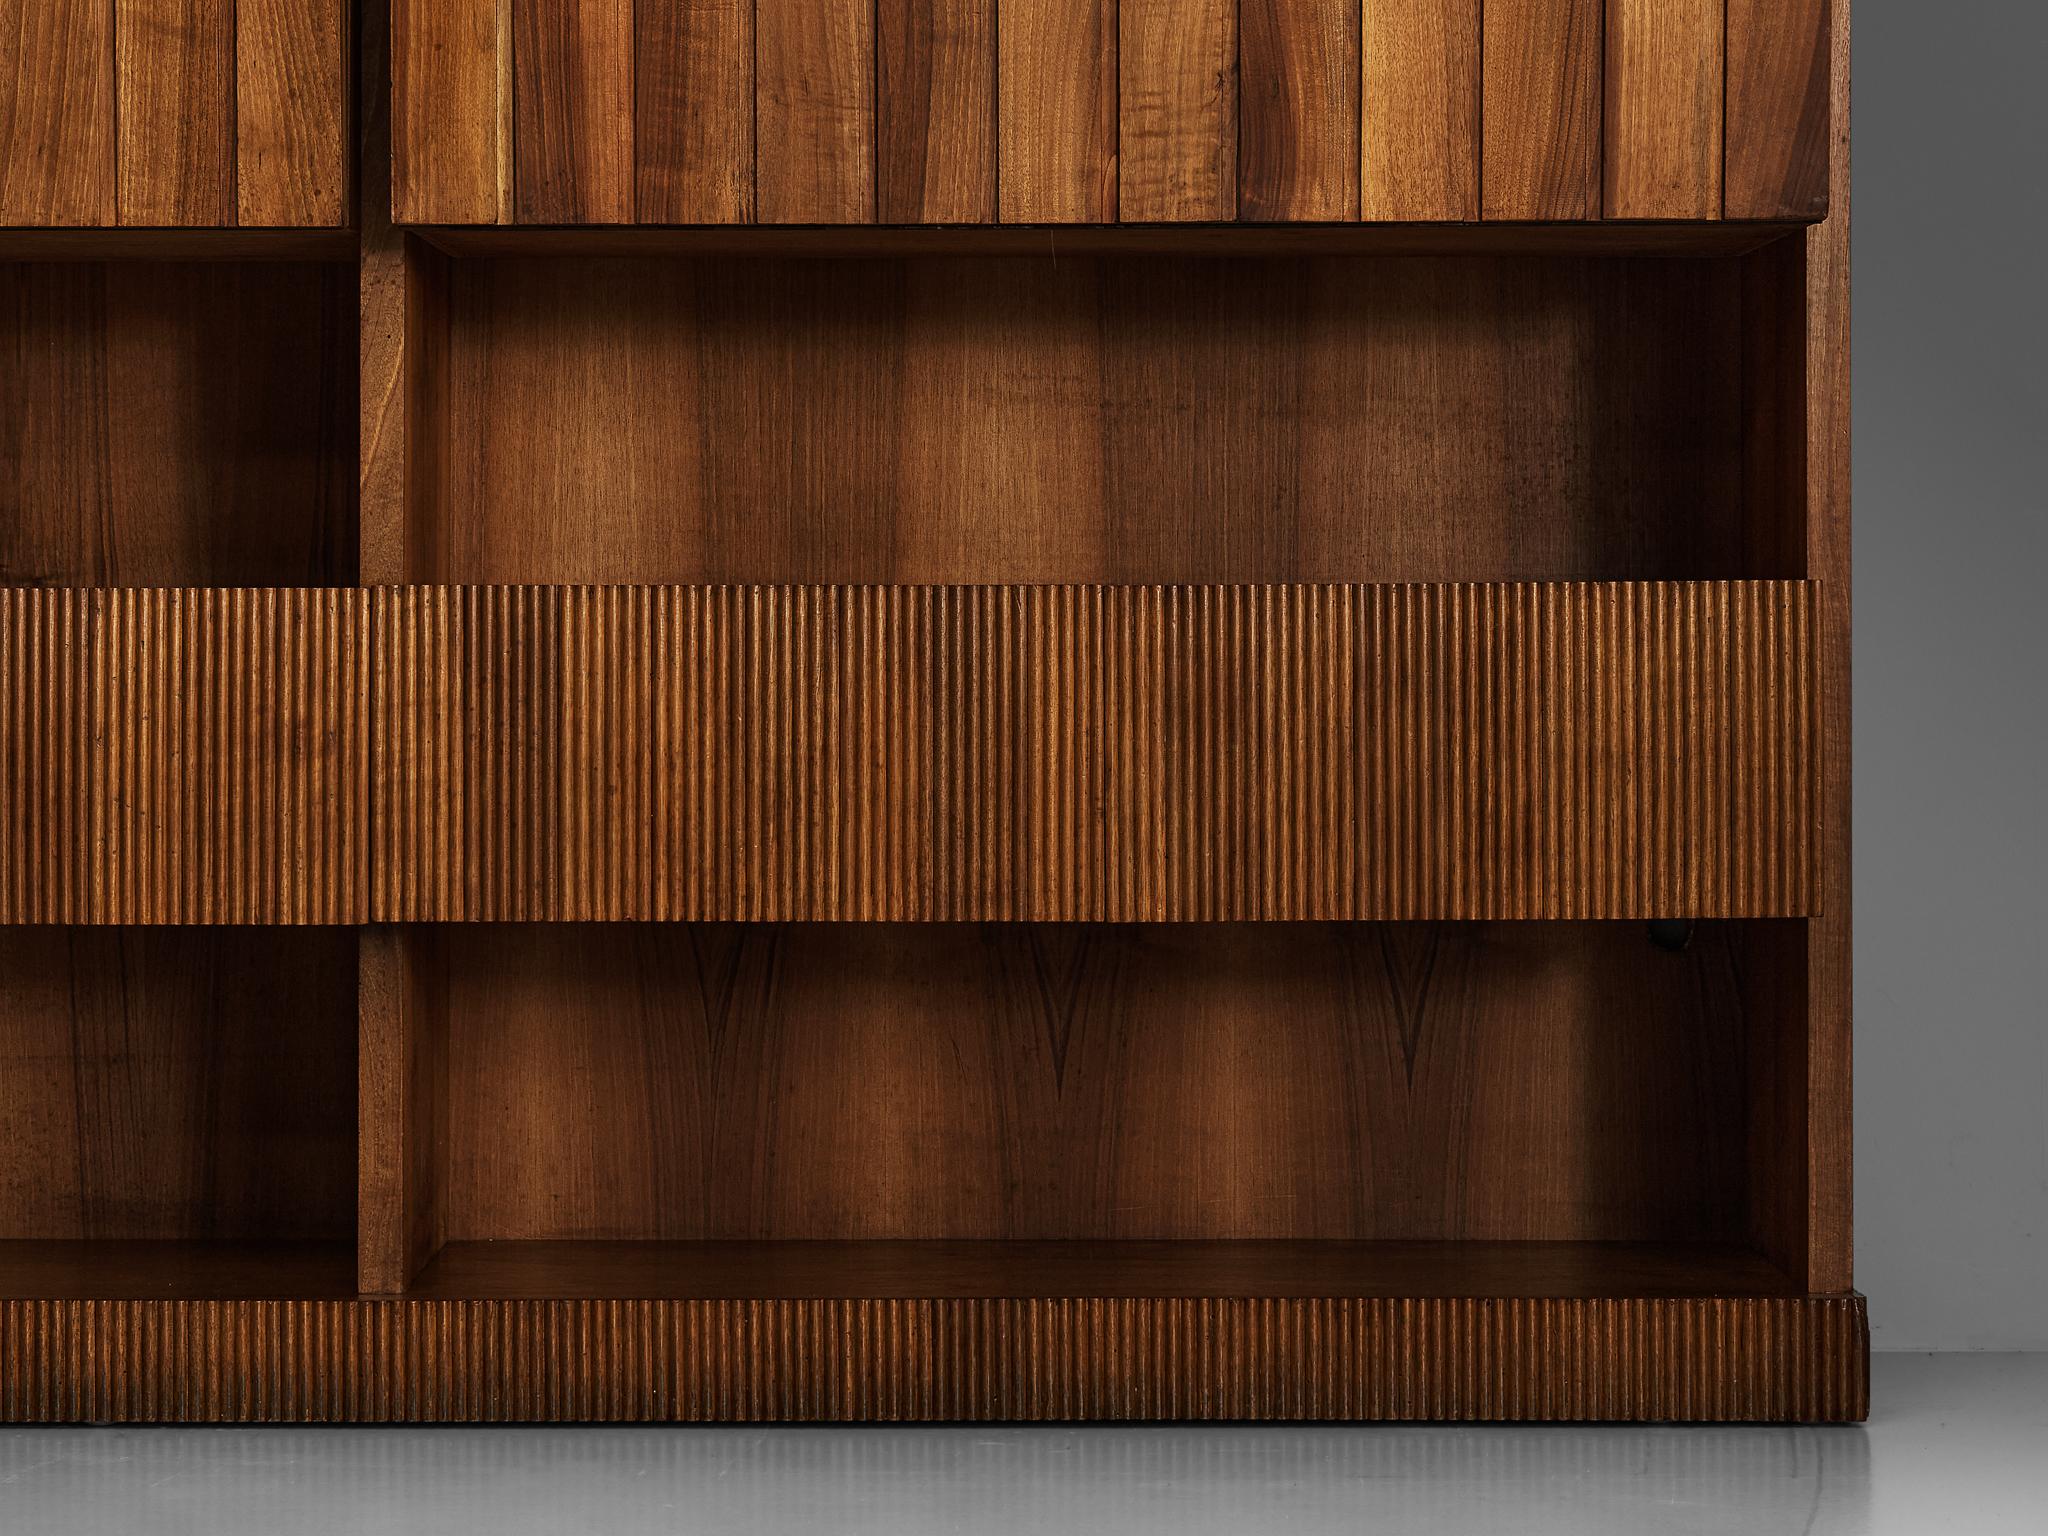 Large Italian Bookcase in Walnut, Cherry, and Grasscloth For Sale 2